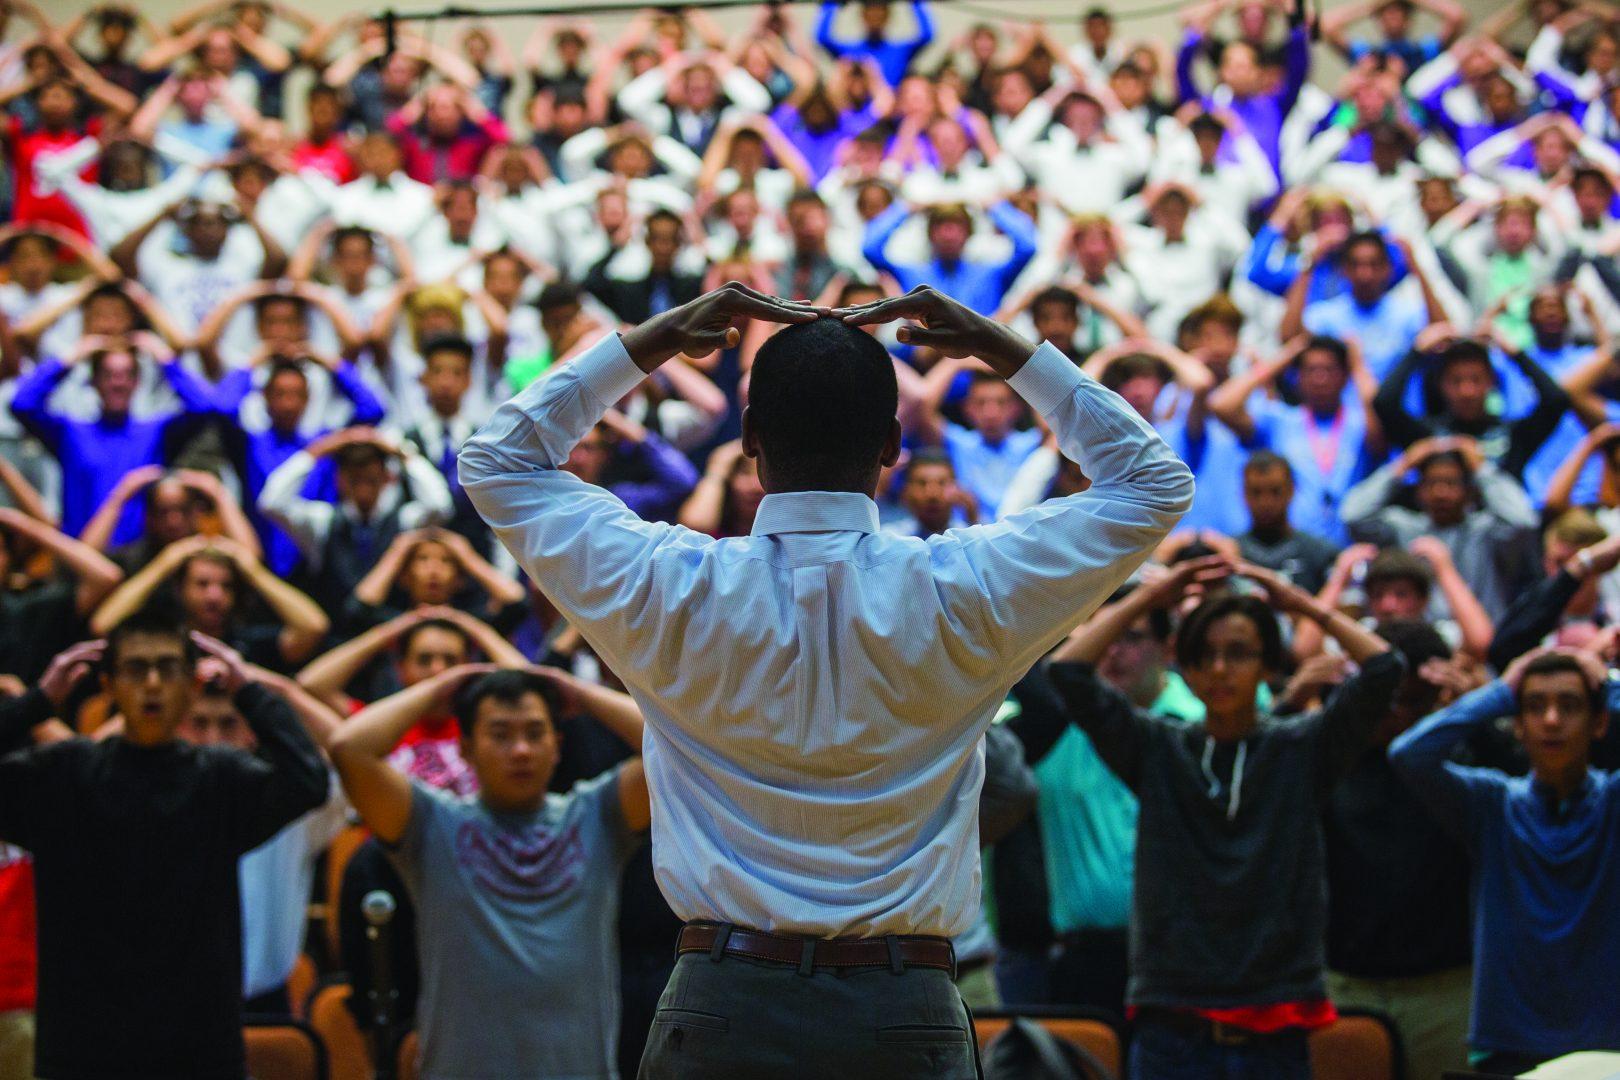 Guest clinician Dr. Rollo Dillworth of Temple University, leads high school choral students in a singing exercise in the Concert Hall at Fresno State for the 14th annual Real Men Sing, Friday, Sept. 18, 2015. The men’s choir festival drew over 700 Central Valley students to campus for the two-day event.  (Darlene Wendels, The Collegian